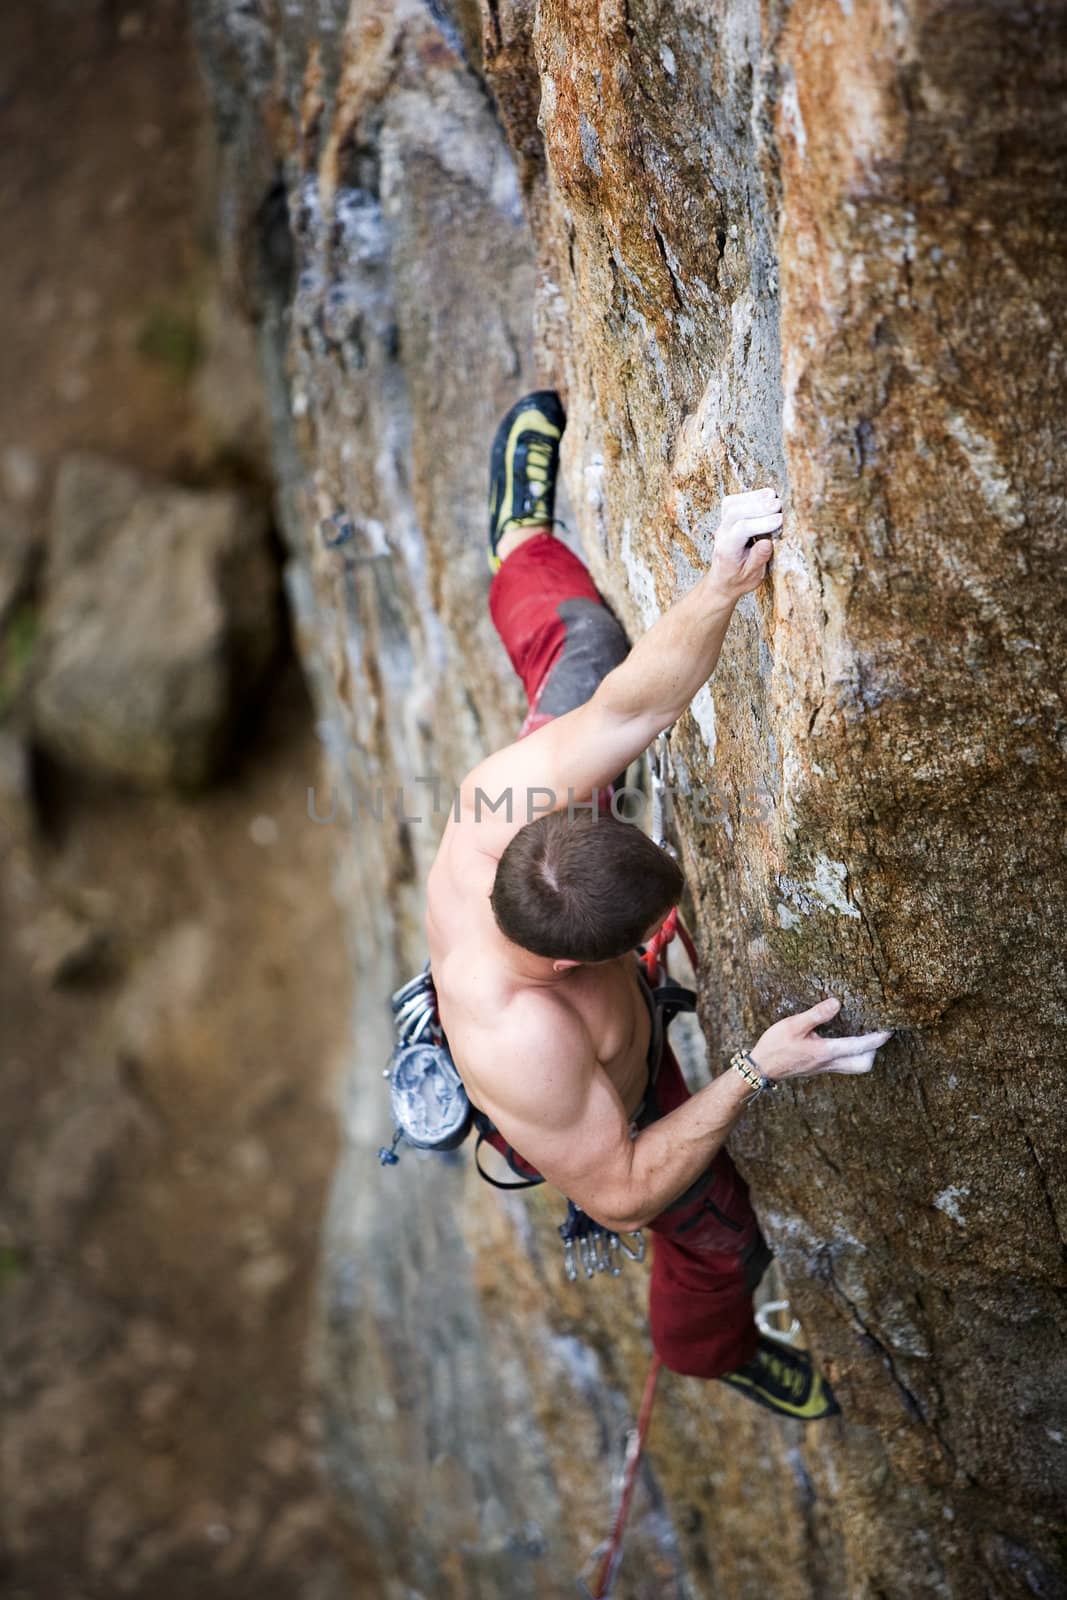 A male climber viewed from above climbs a steep crag. Shallow depth of field is used to isolate the climber with focus on the hands and head